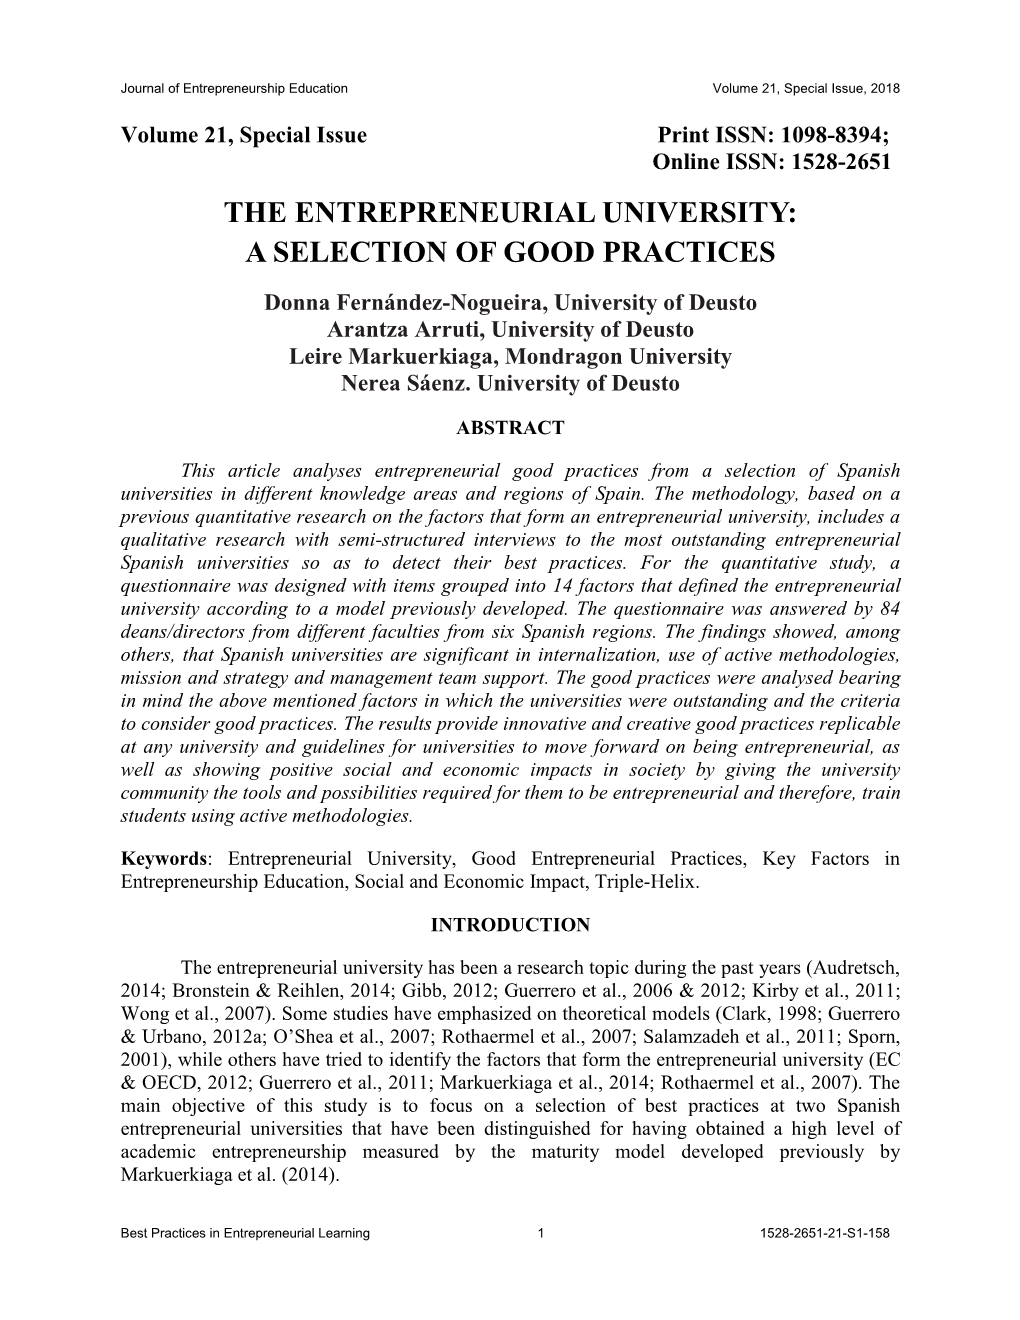 The Entrepreneurial University a Selection of Good Practices